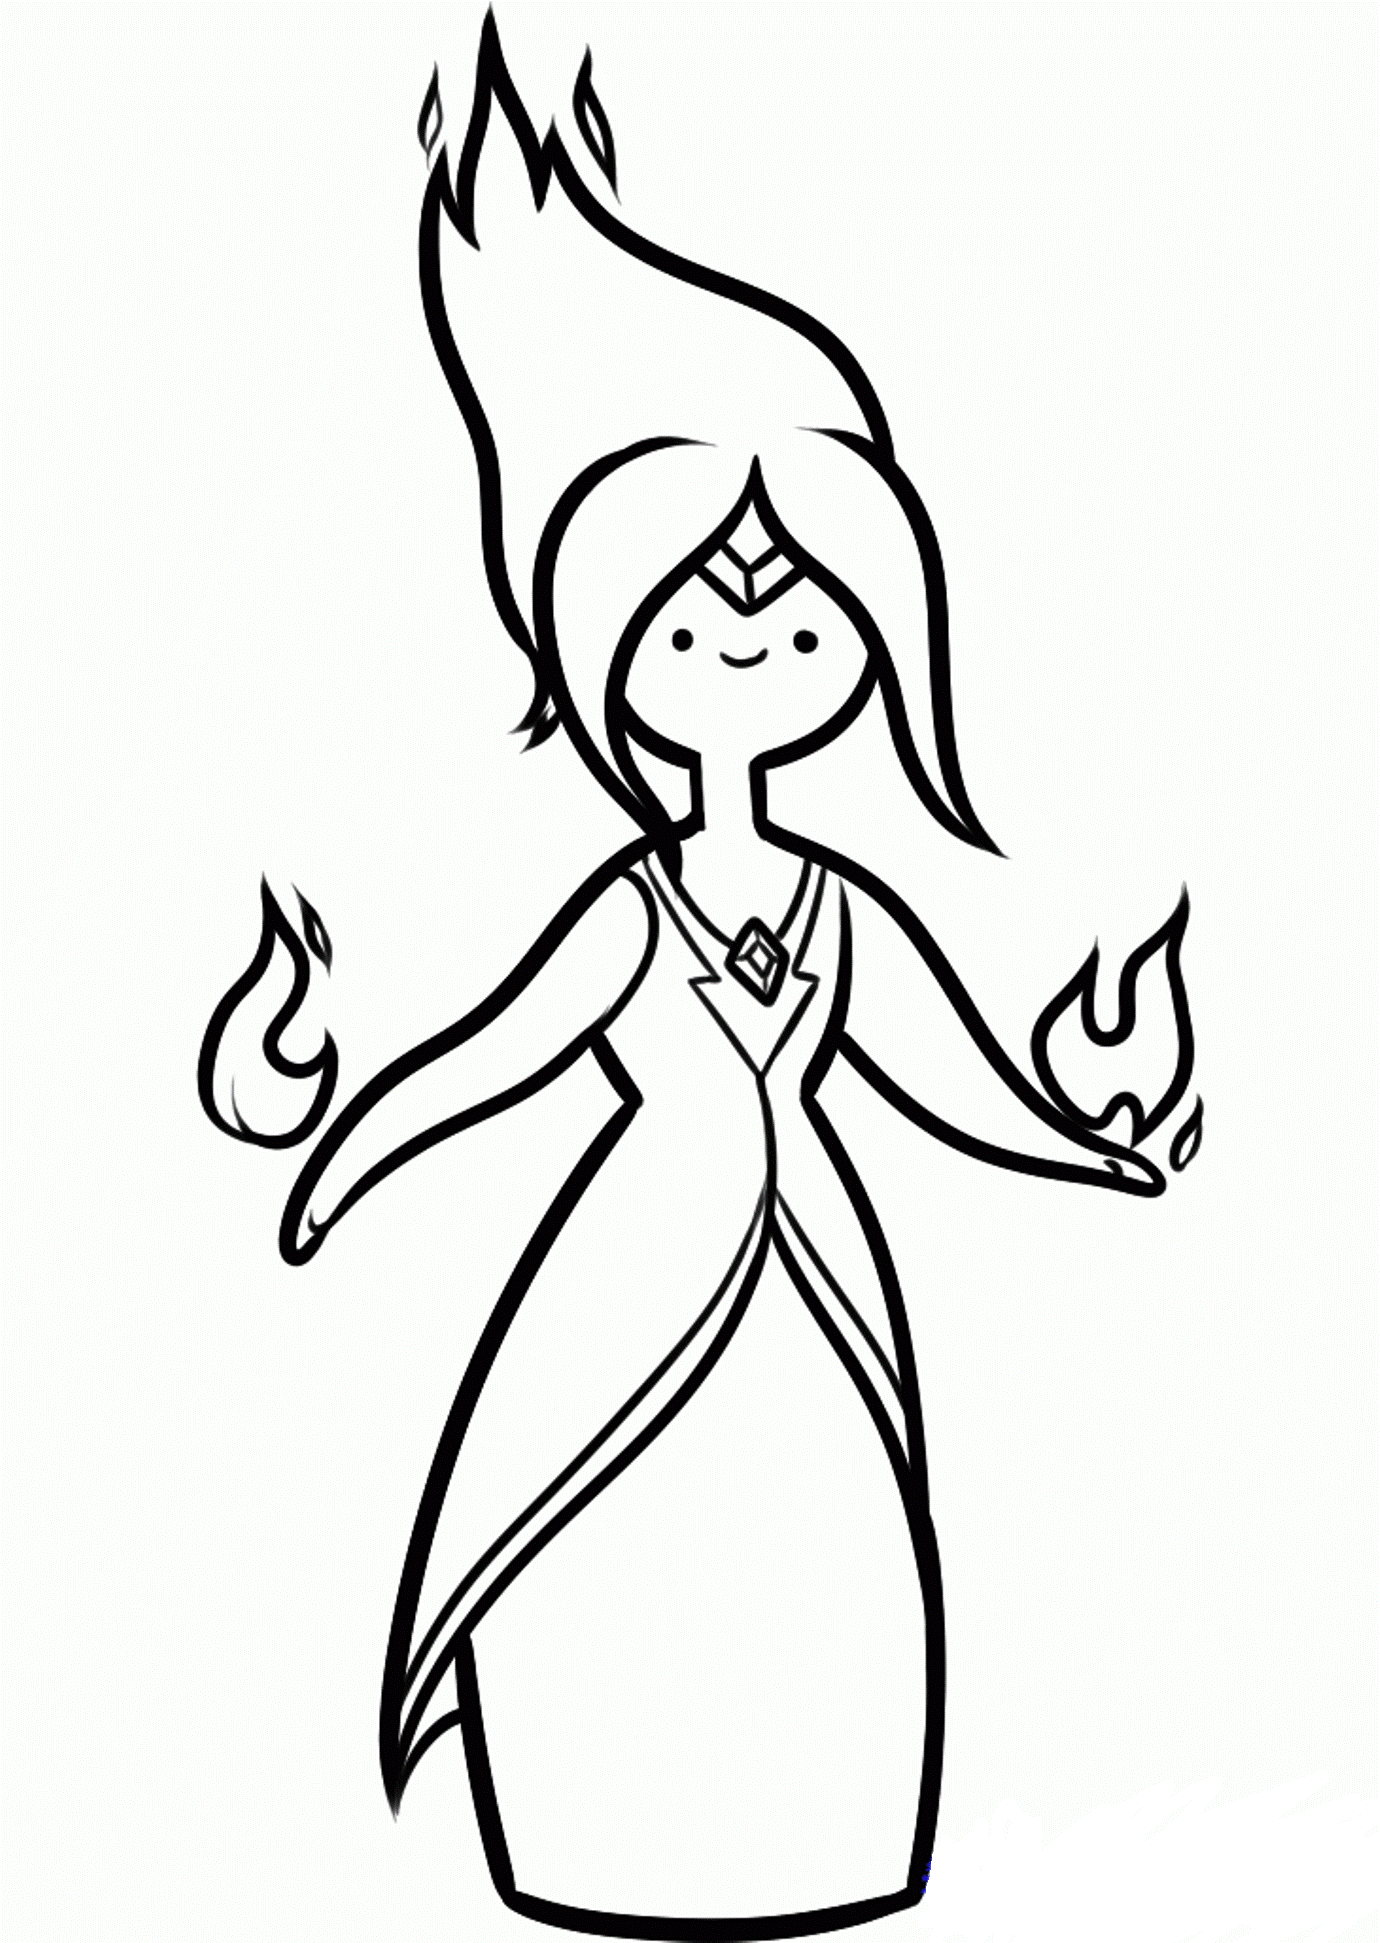 Princess Flame Adventure Time Coloring Pages | Cartoon Coloring ...